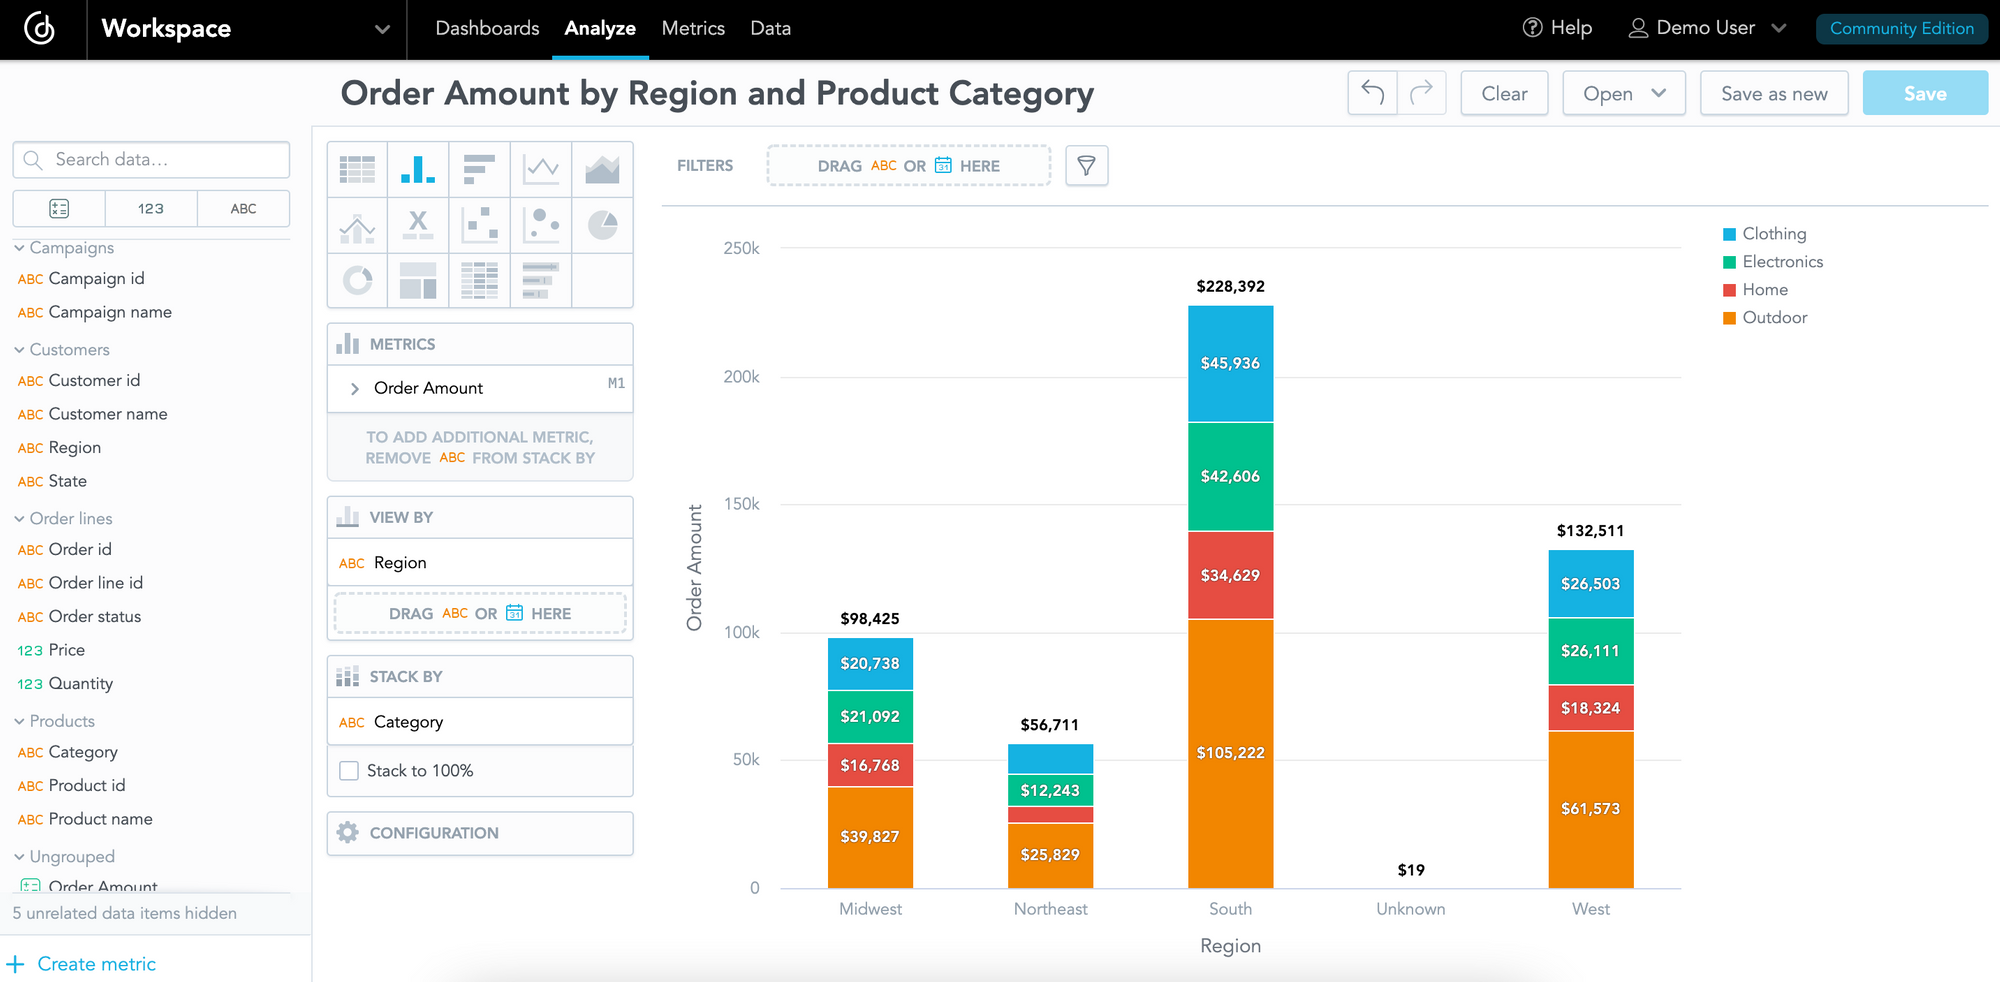 Screenshot of GoodData’s Analytical Designer tool. Sales chart depicting order amounts of various product categories by region.